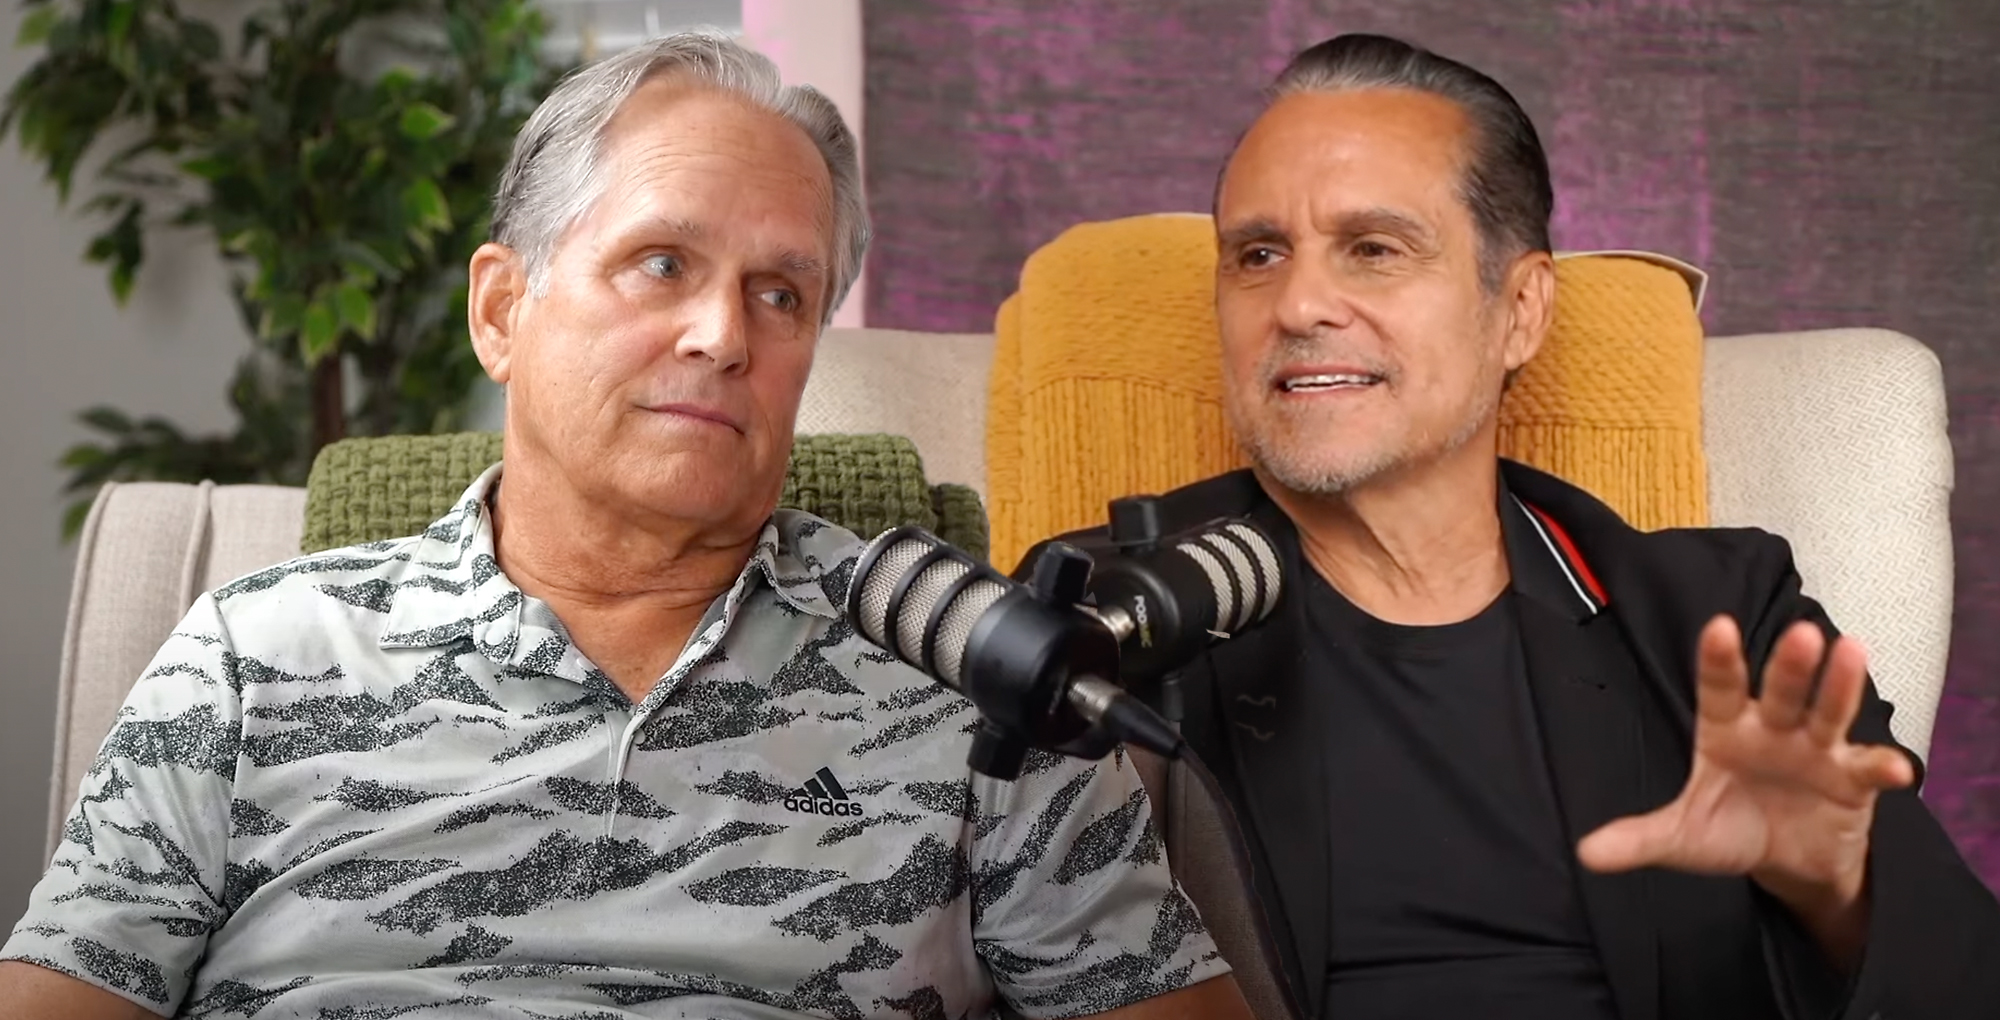 gh co-star gregory harrison joins maurice benard on state of mind.